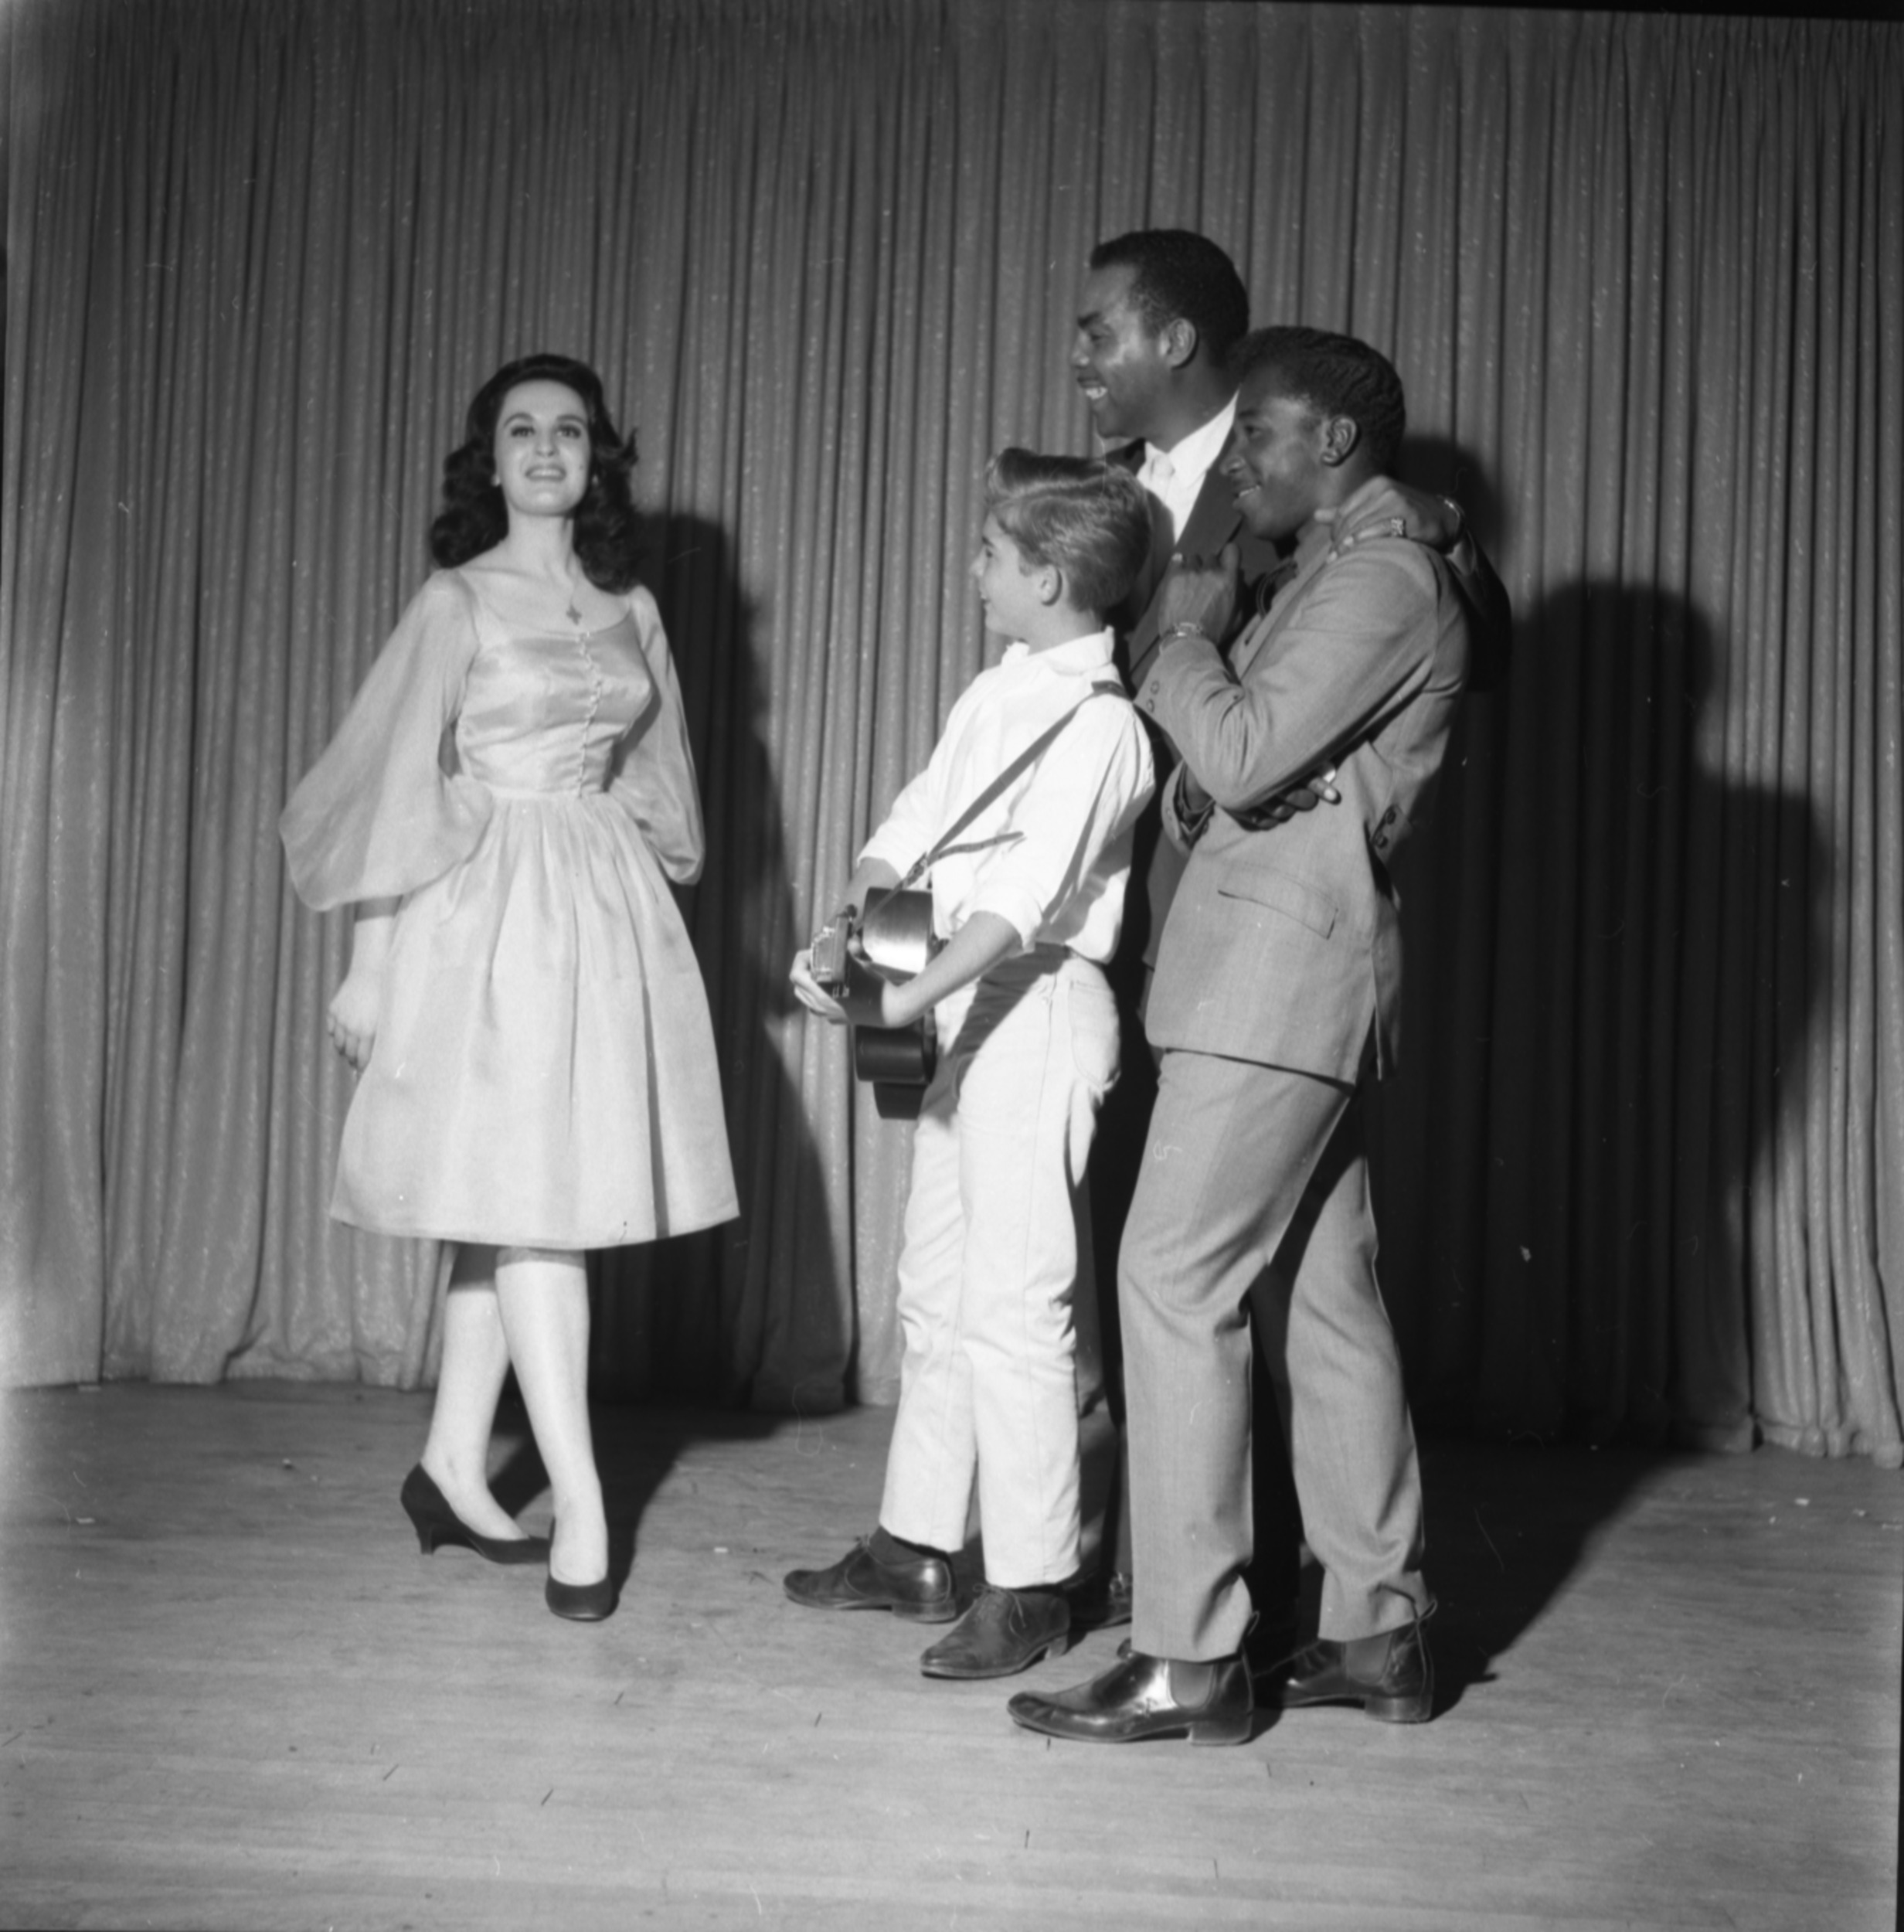 Carver House Talent Contest, May 9, 1962, Image 05